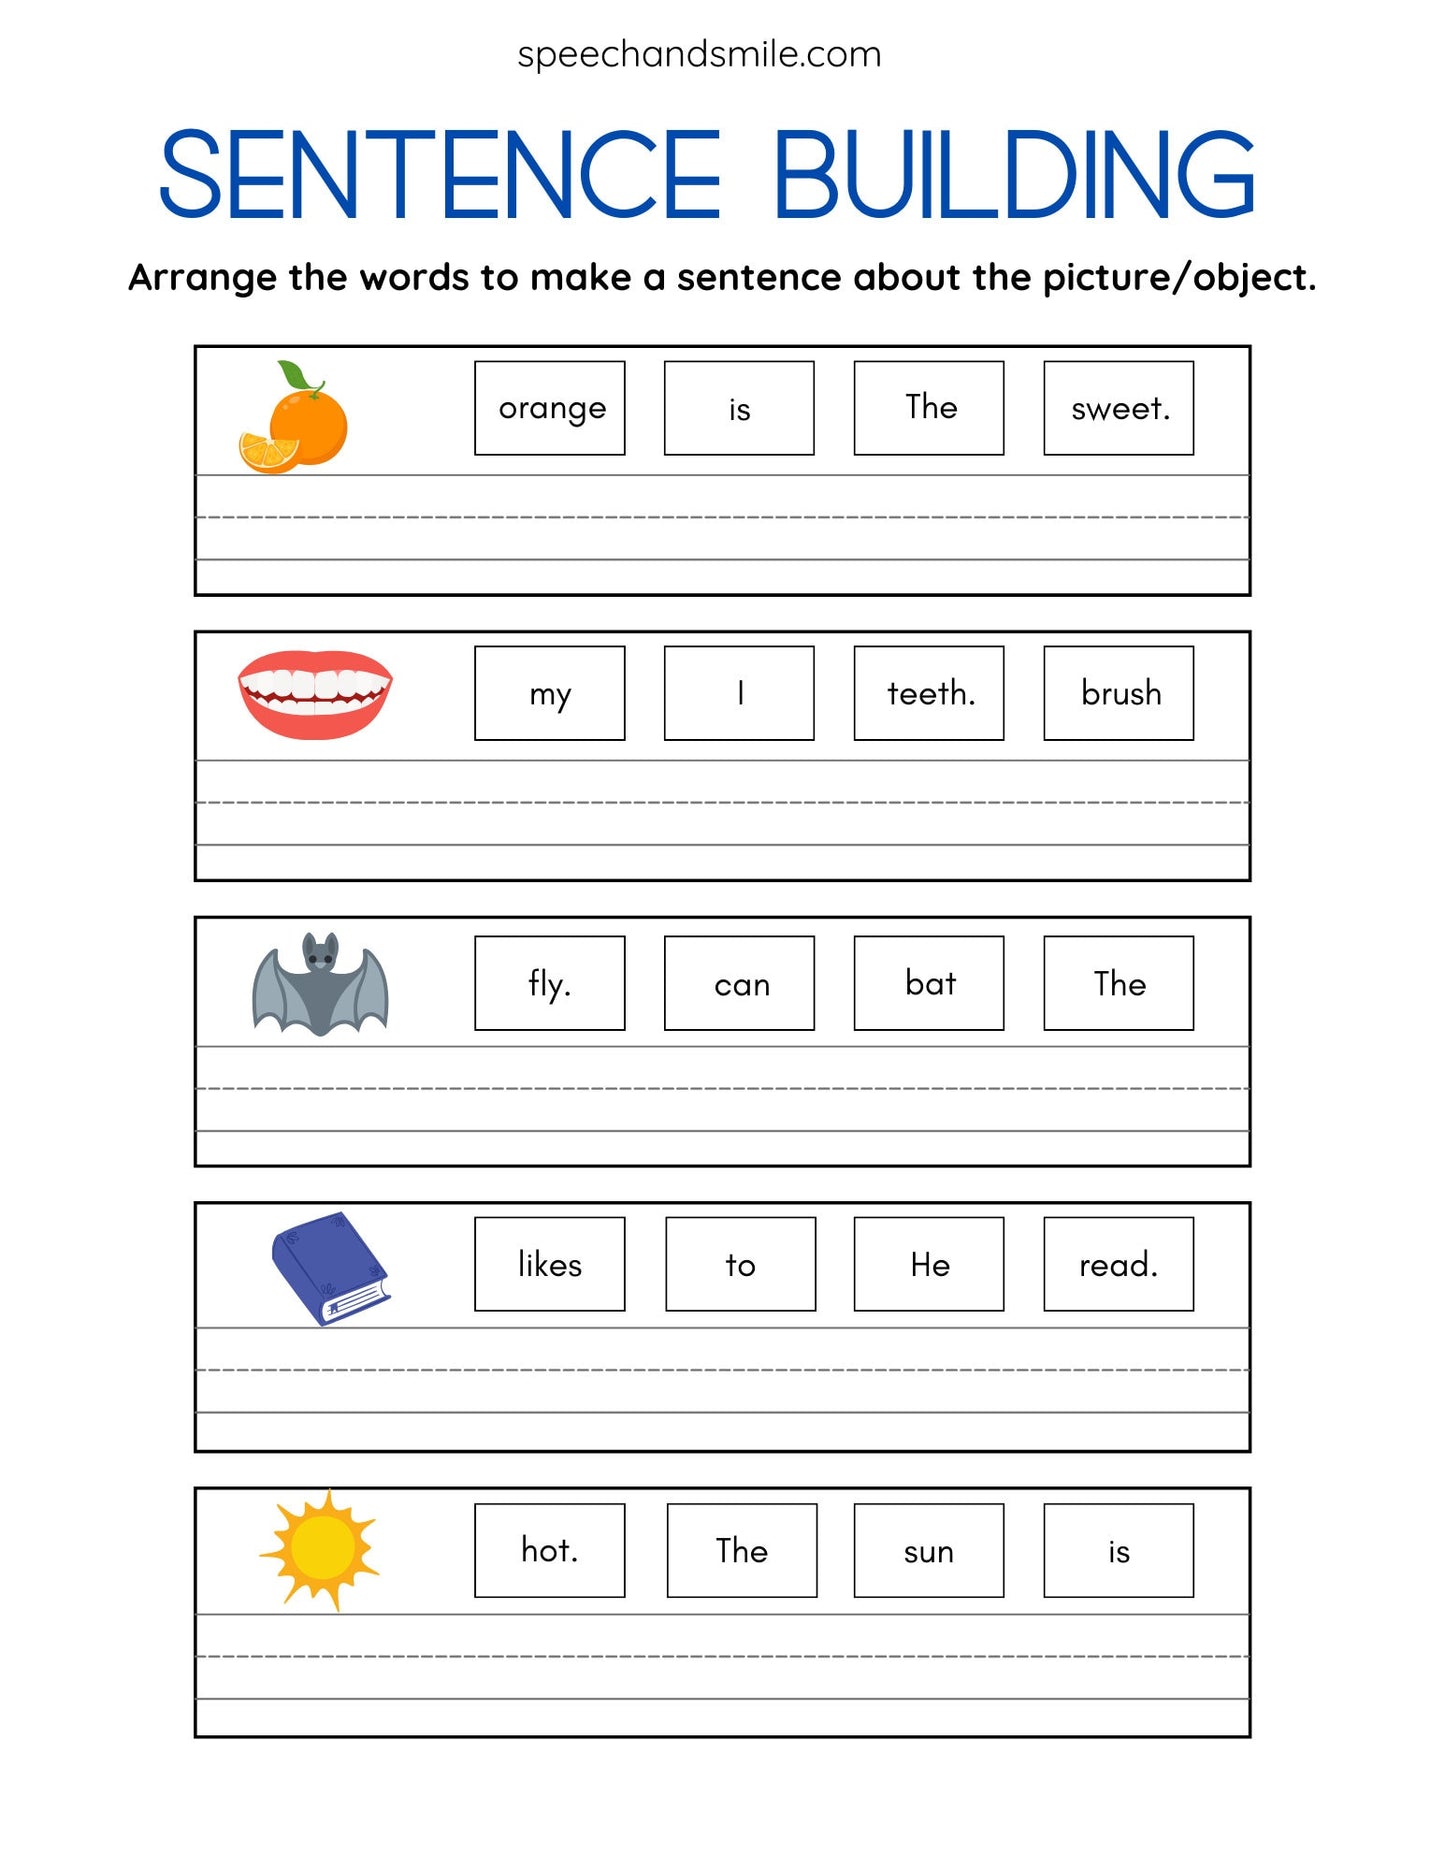 Build a Sentence Worksheet with Miniature Objects Sentence Building Activity - Speech Therapy Printable Worksheets